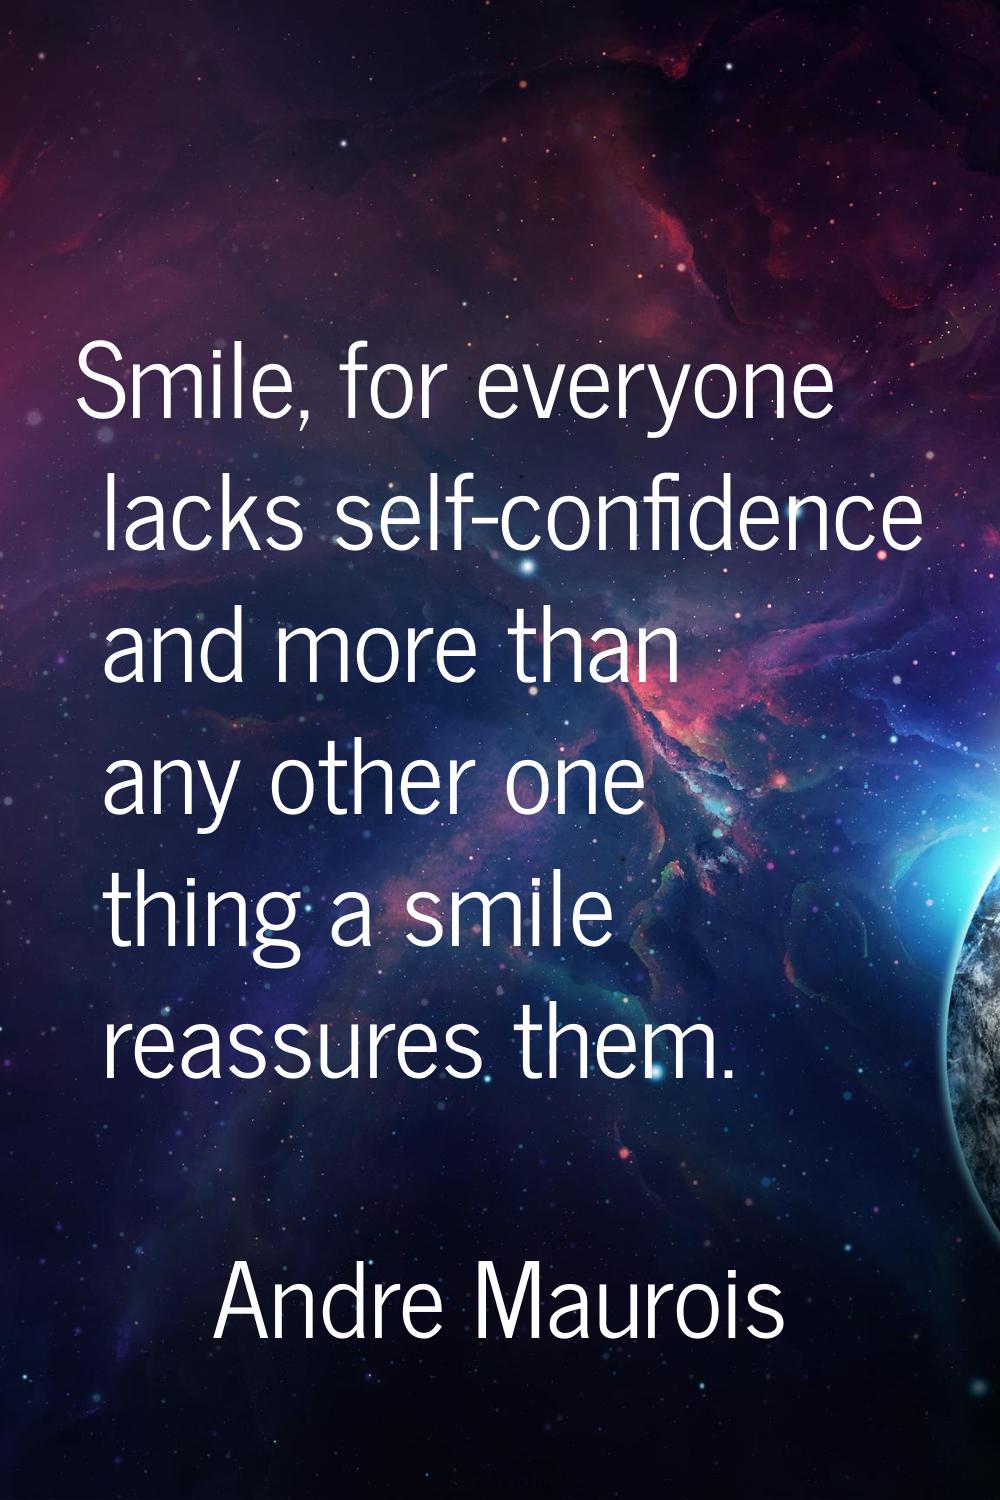 Smile, for everyone lacks self-confidence and more than any other one thing a smile reassures them.